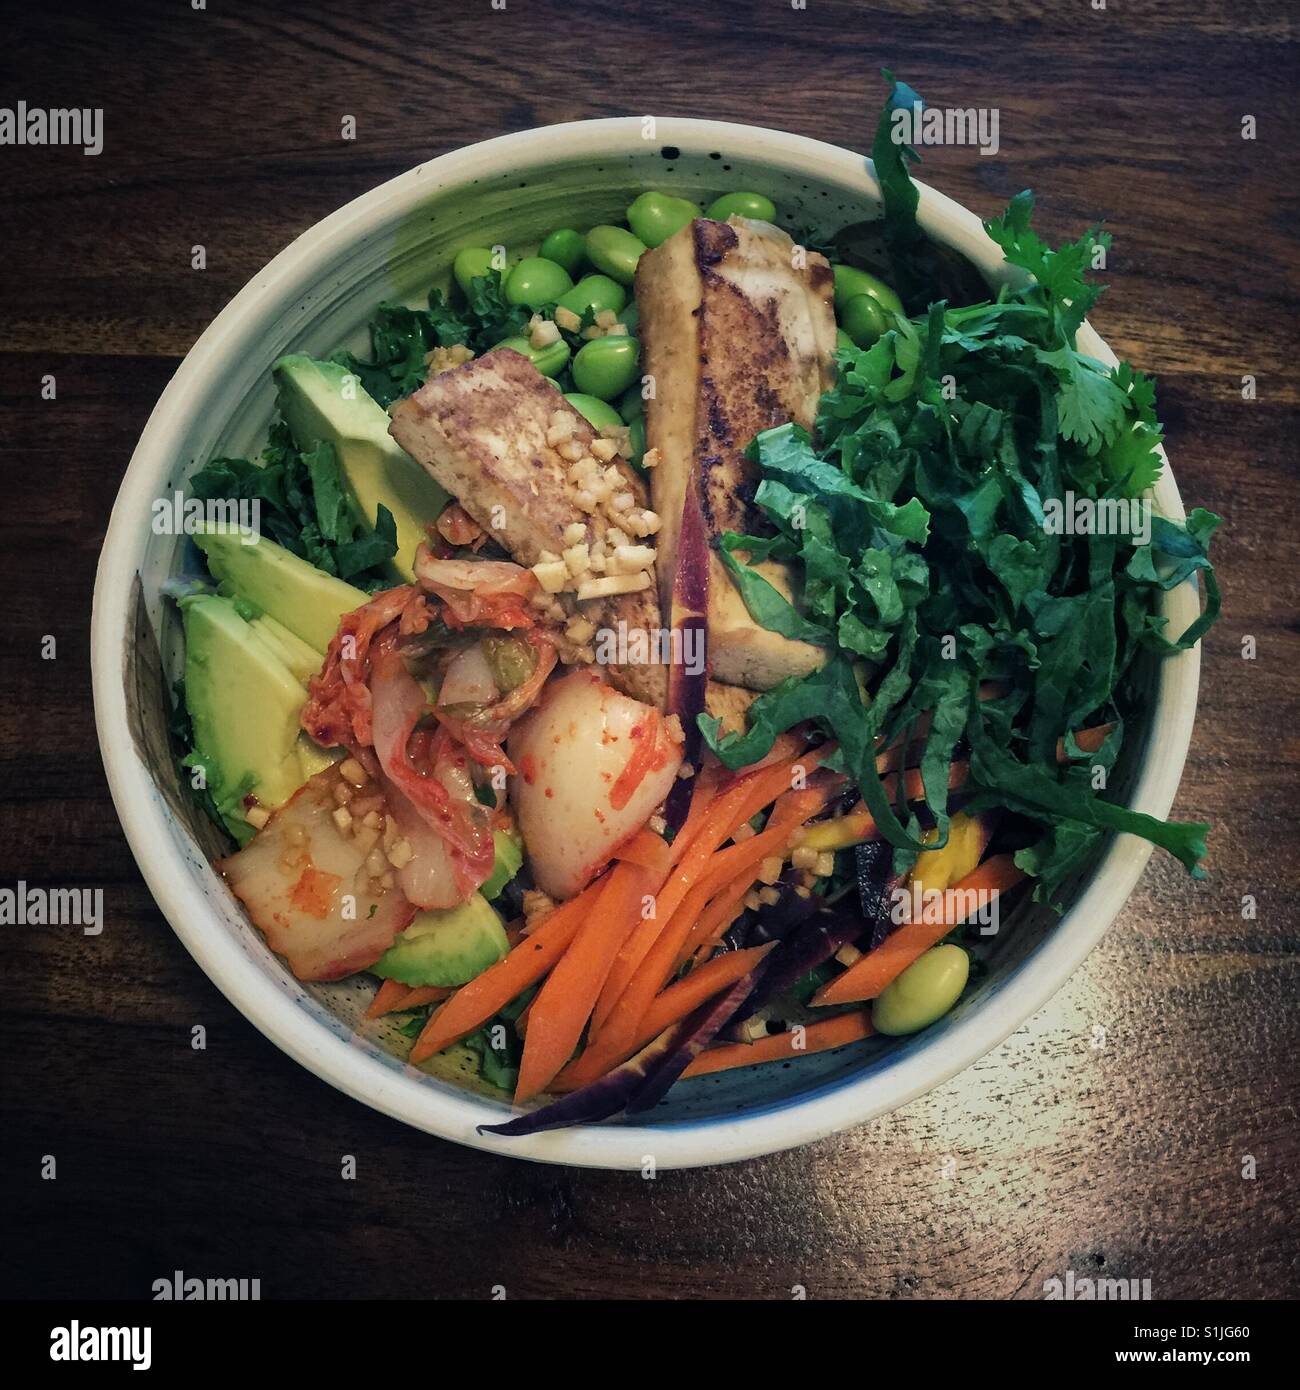 Fancy vegan grain and vegetables bowl with kimchi Stock Photo